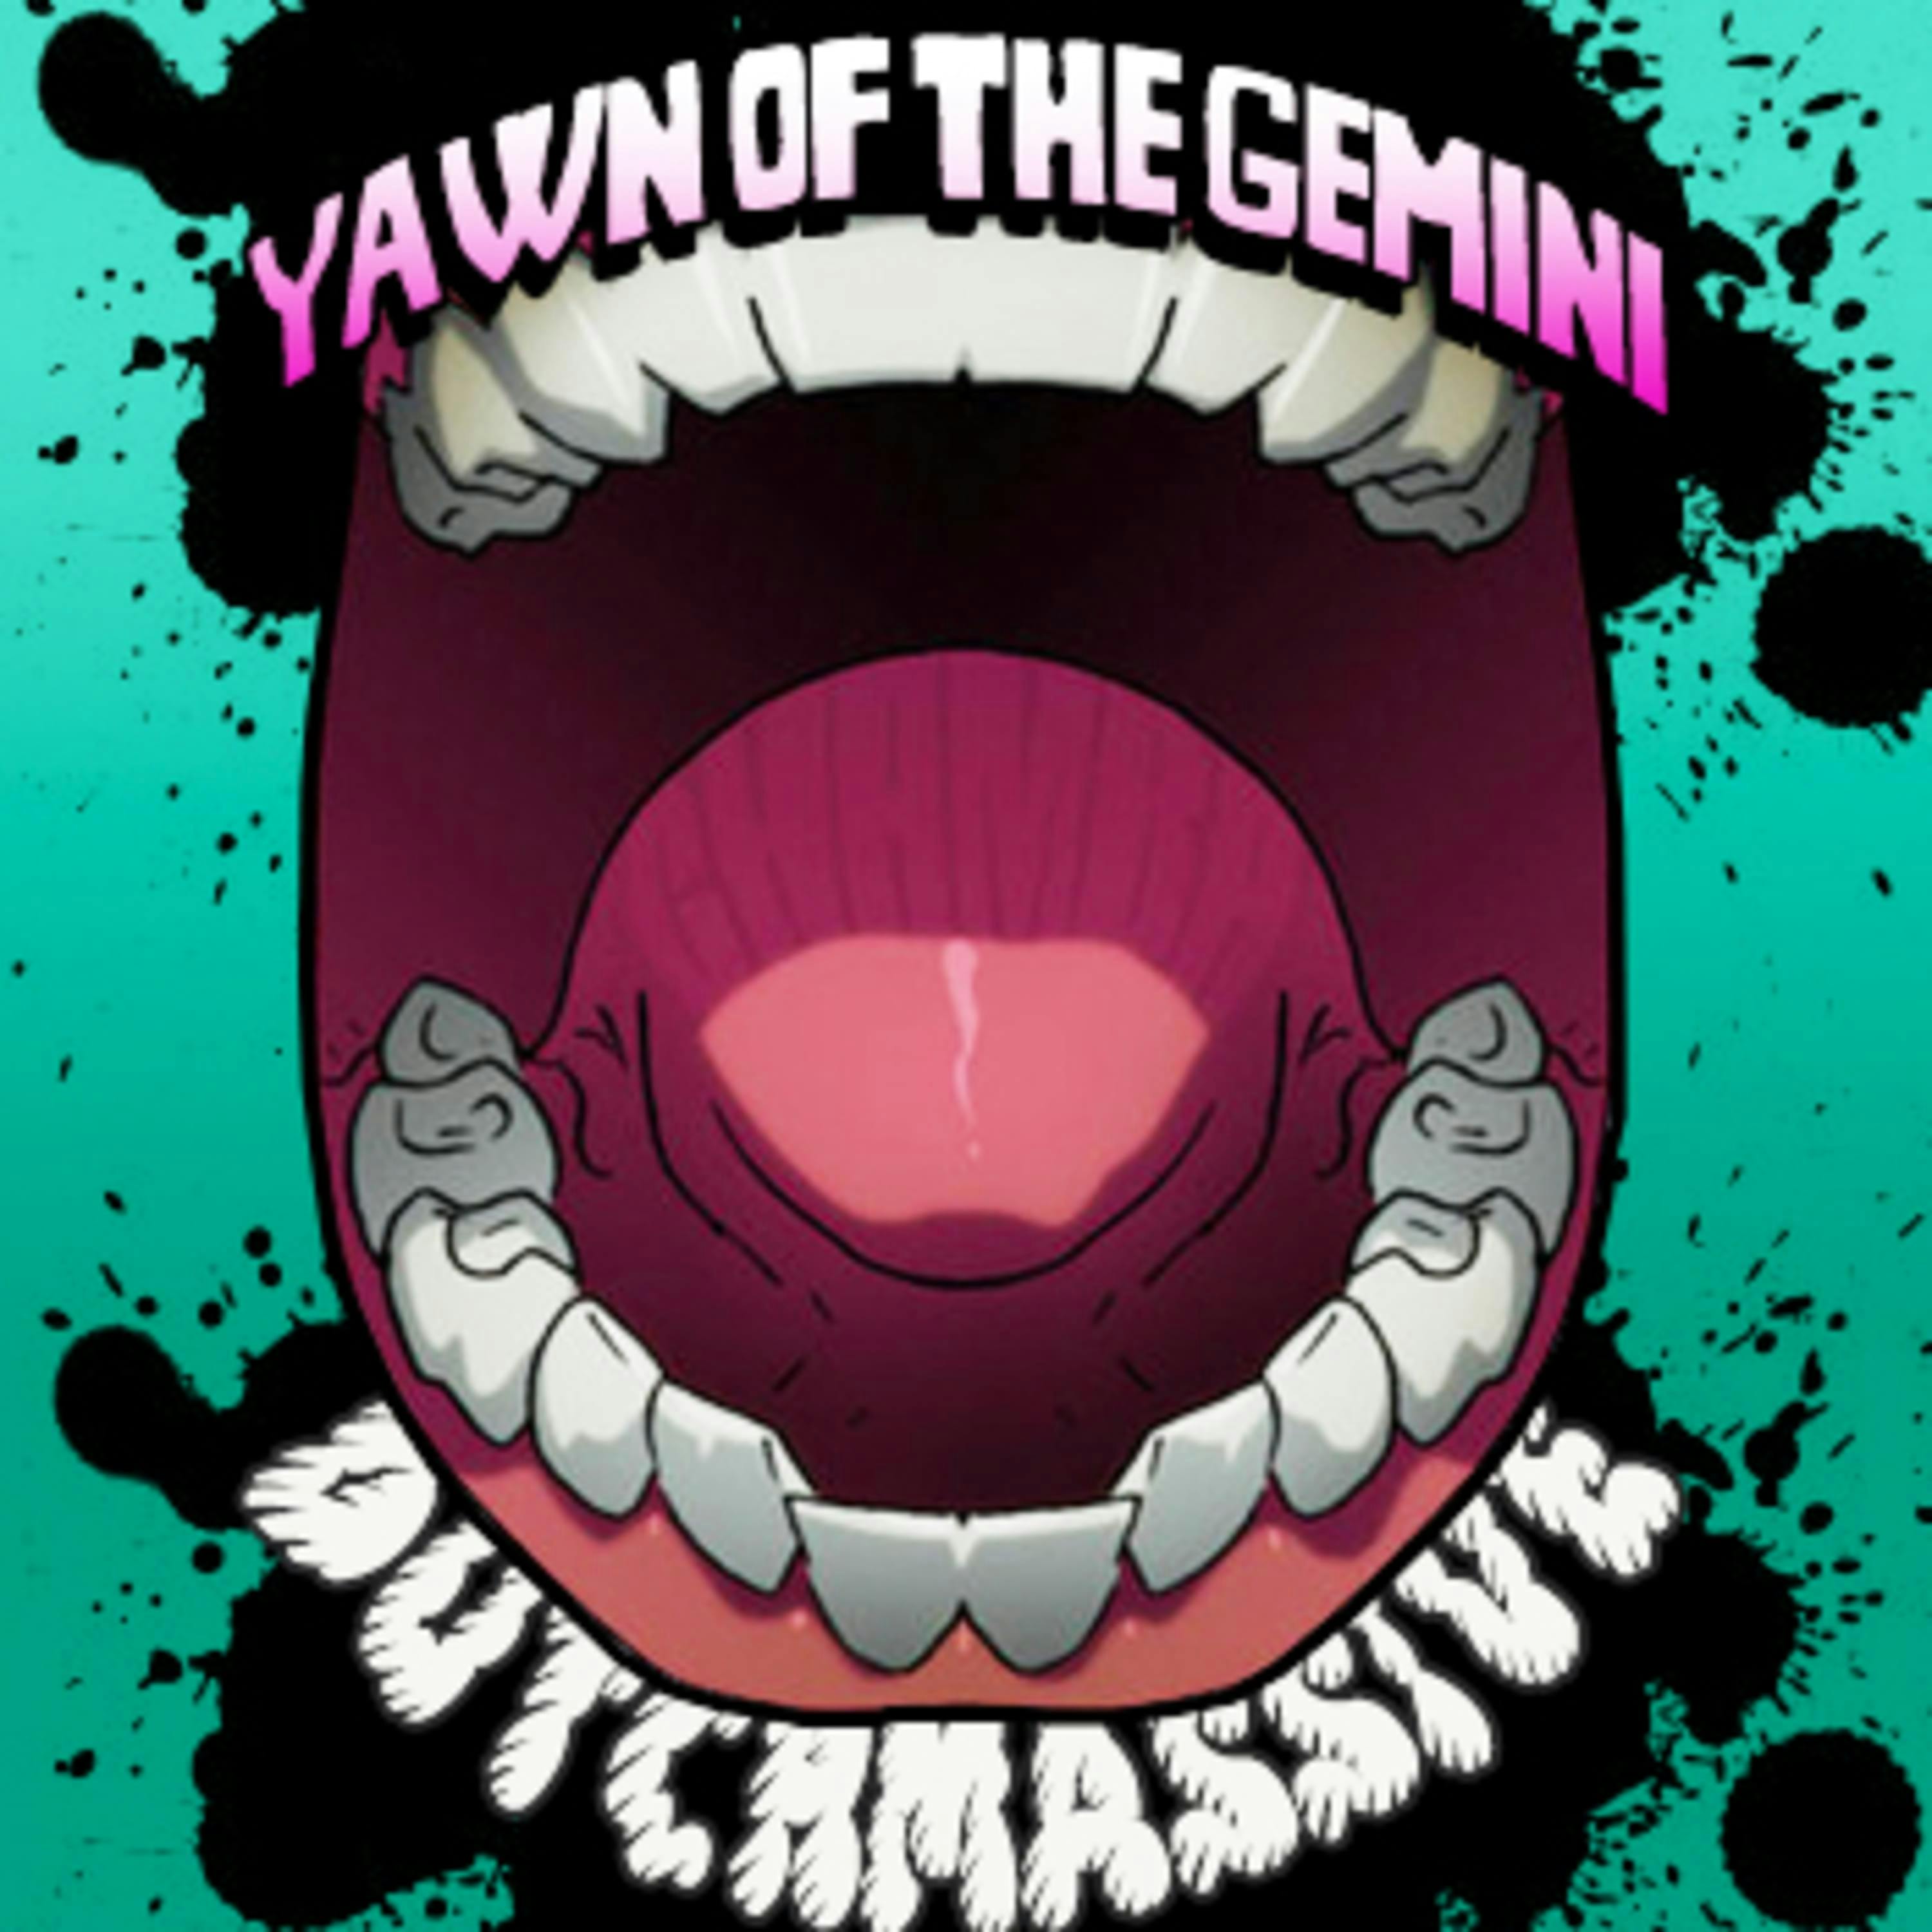 Cover art for Dutchyyy's song: Yawn of the Gemini